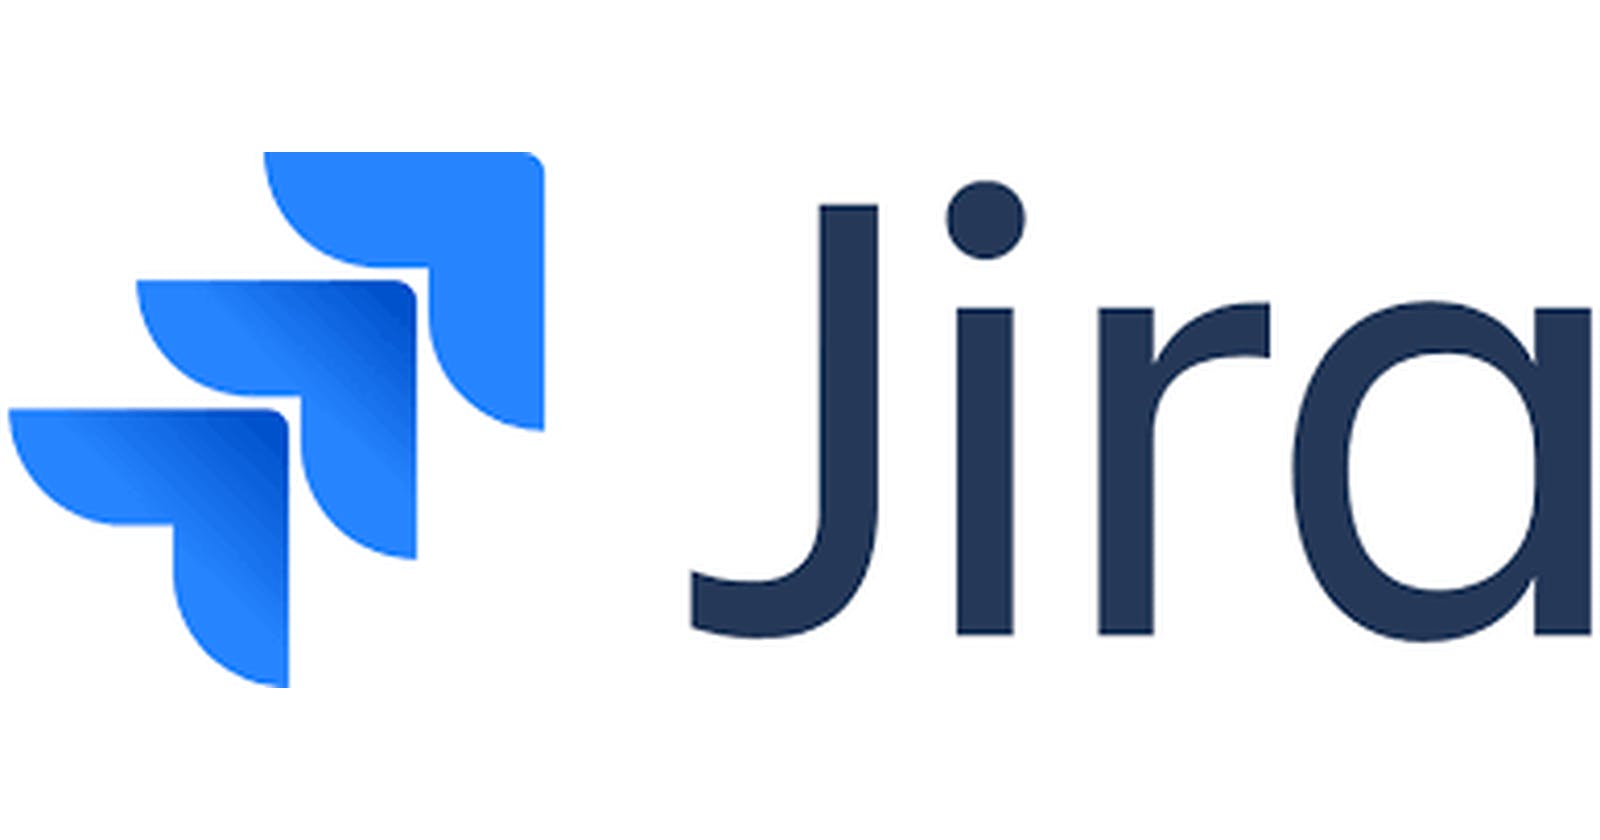 If you want to test JIRA, then just say NO.